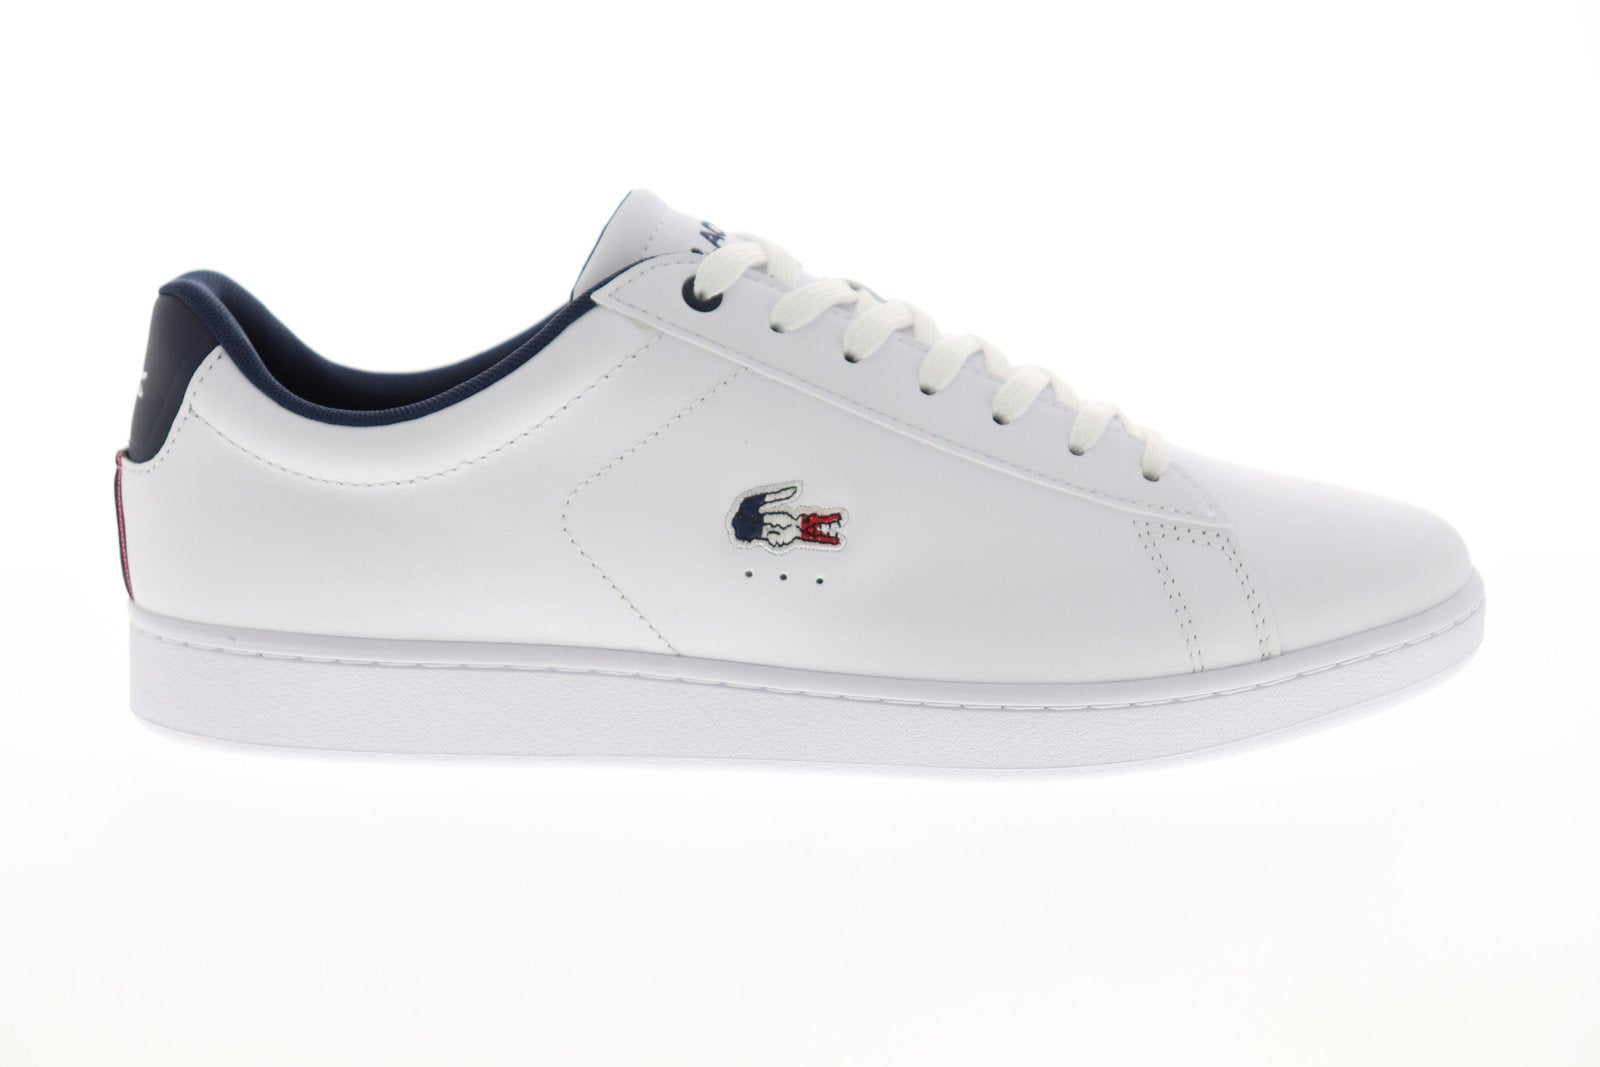 ontgrendelen noodzaak Daarom Lacoste Carnaby Evo 119 7 SMA Mens White Leather Lifestyle Sneakers Sh -  Ruze Shoes